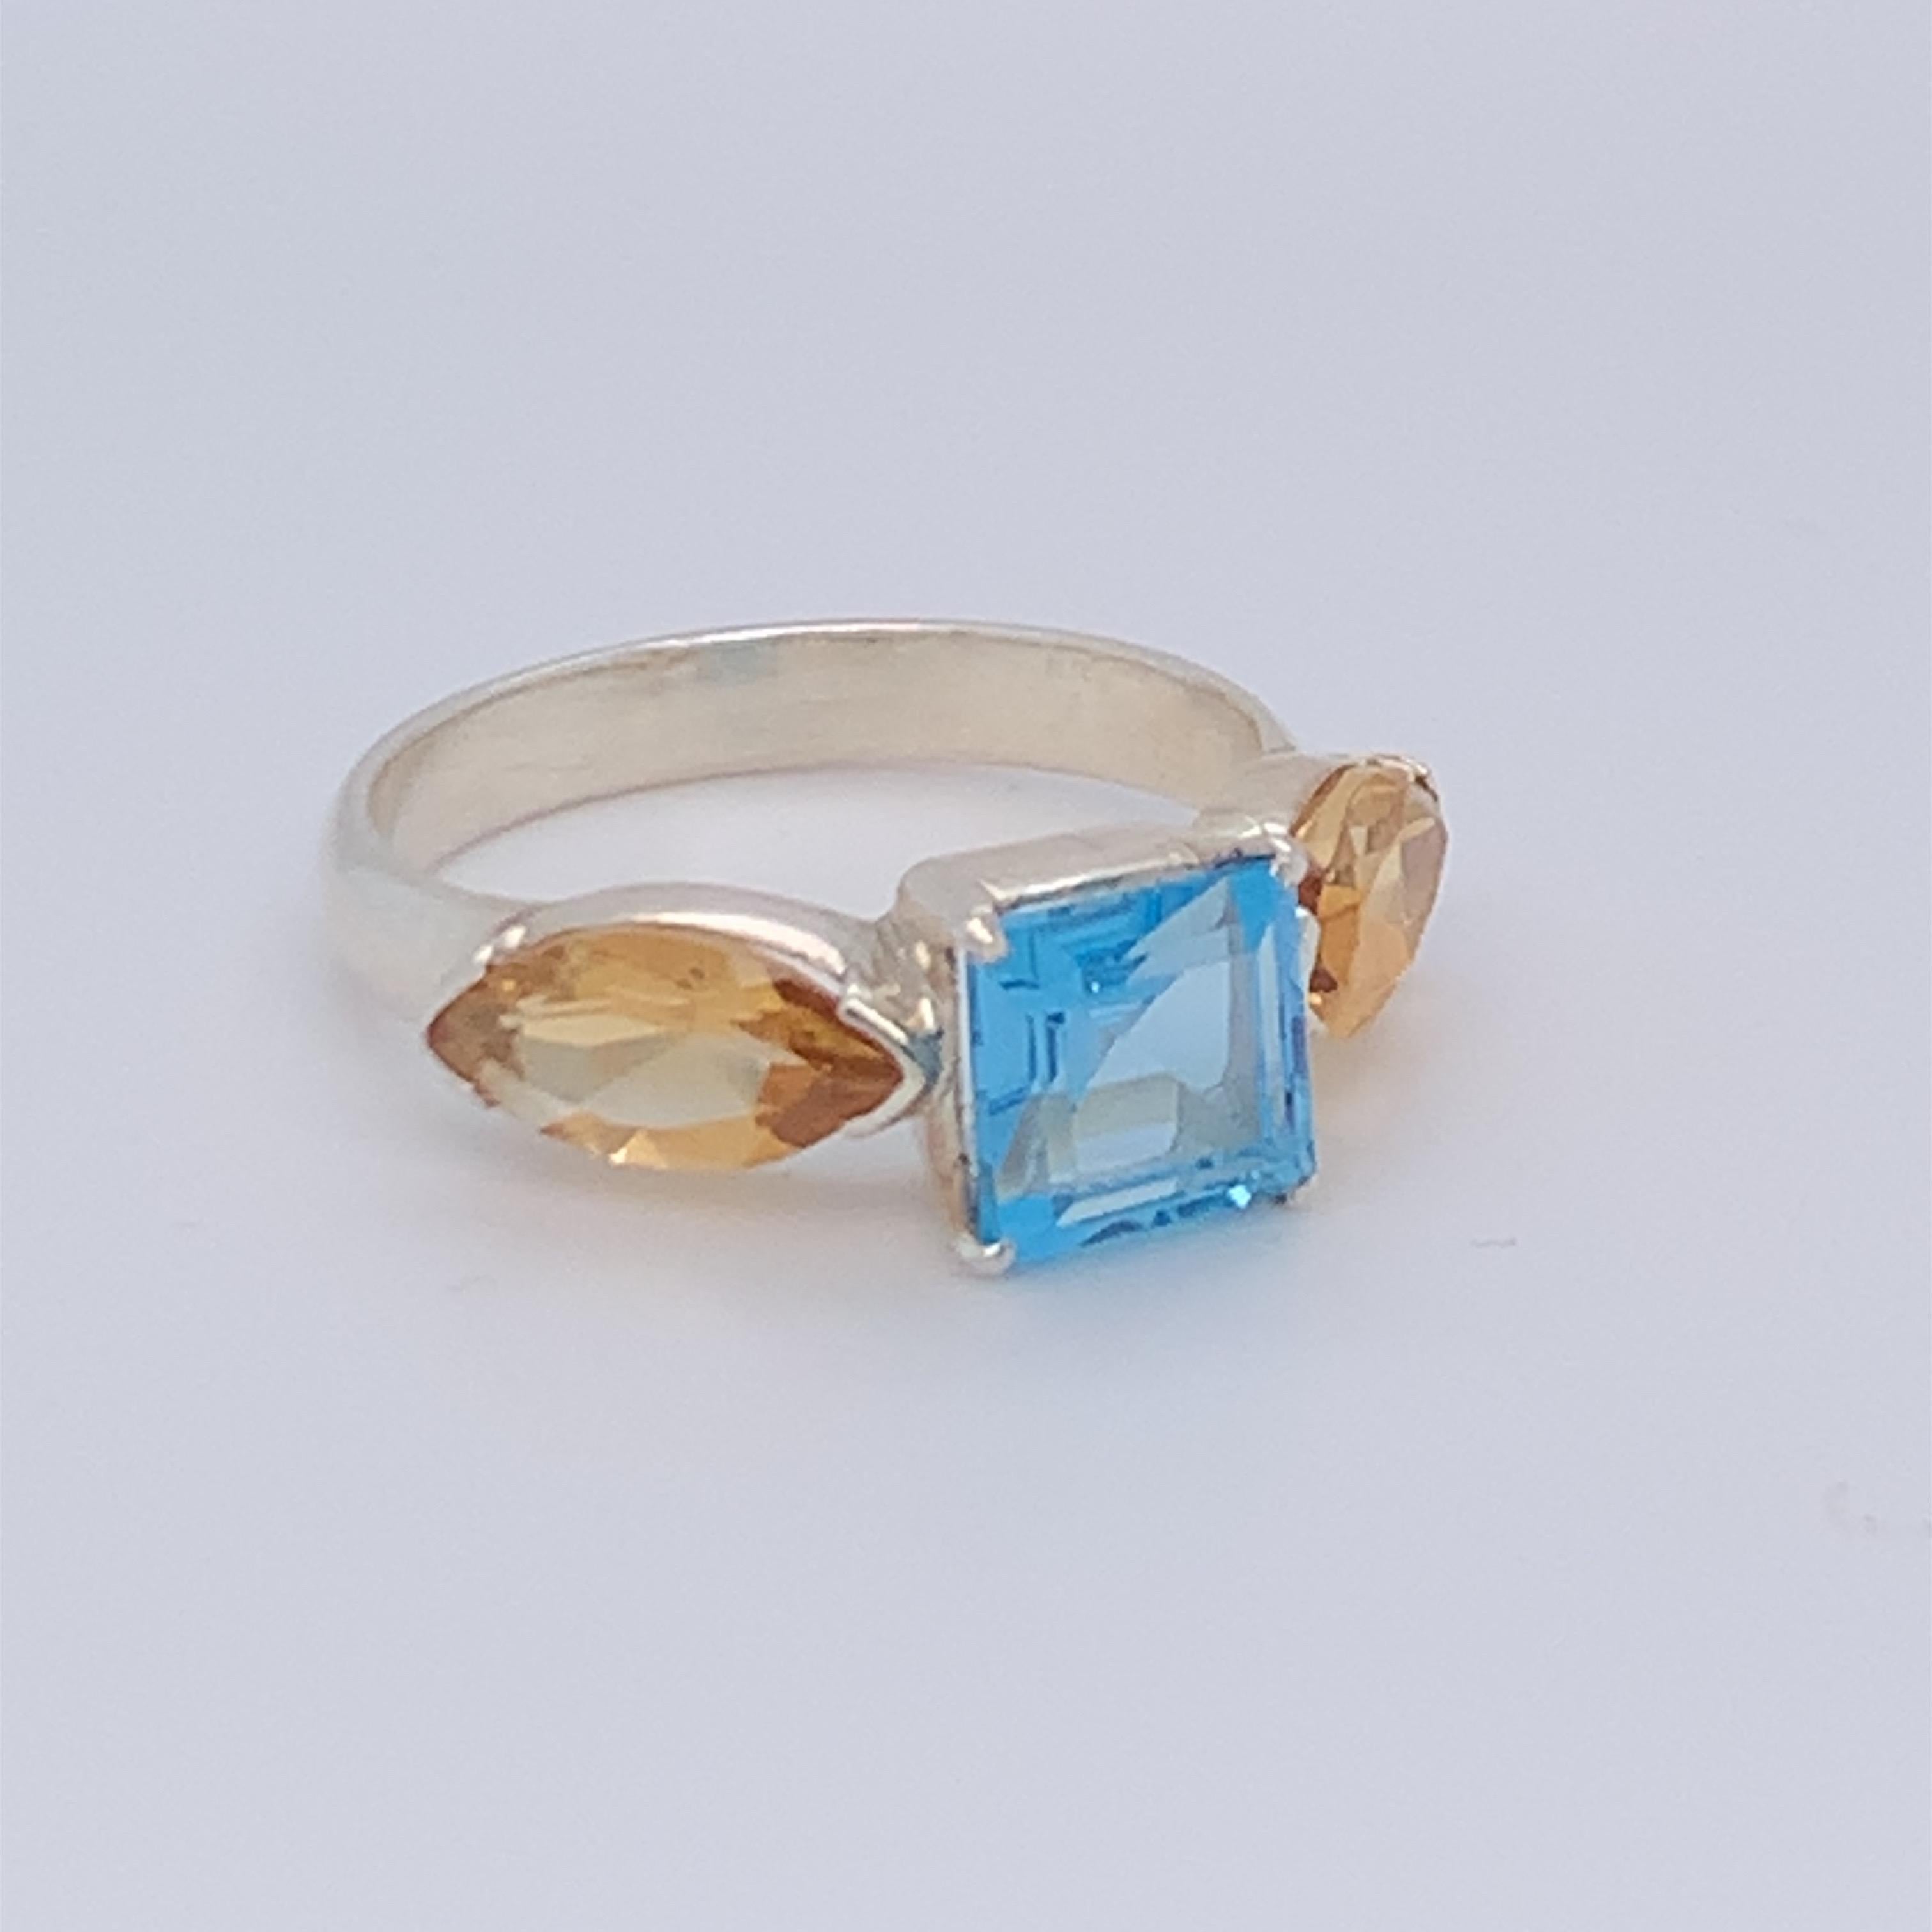 This beautiful square blue topaz ring boasts two marquise citrine on each side. It is simple, plain and suitable for day wear. Set in sterling silver and hand made by master craftsman.

Total weight of stone: 2.90ct (approximate)
Size: 8